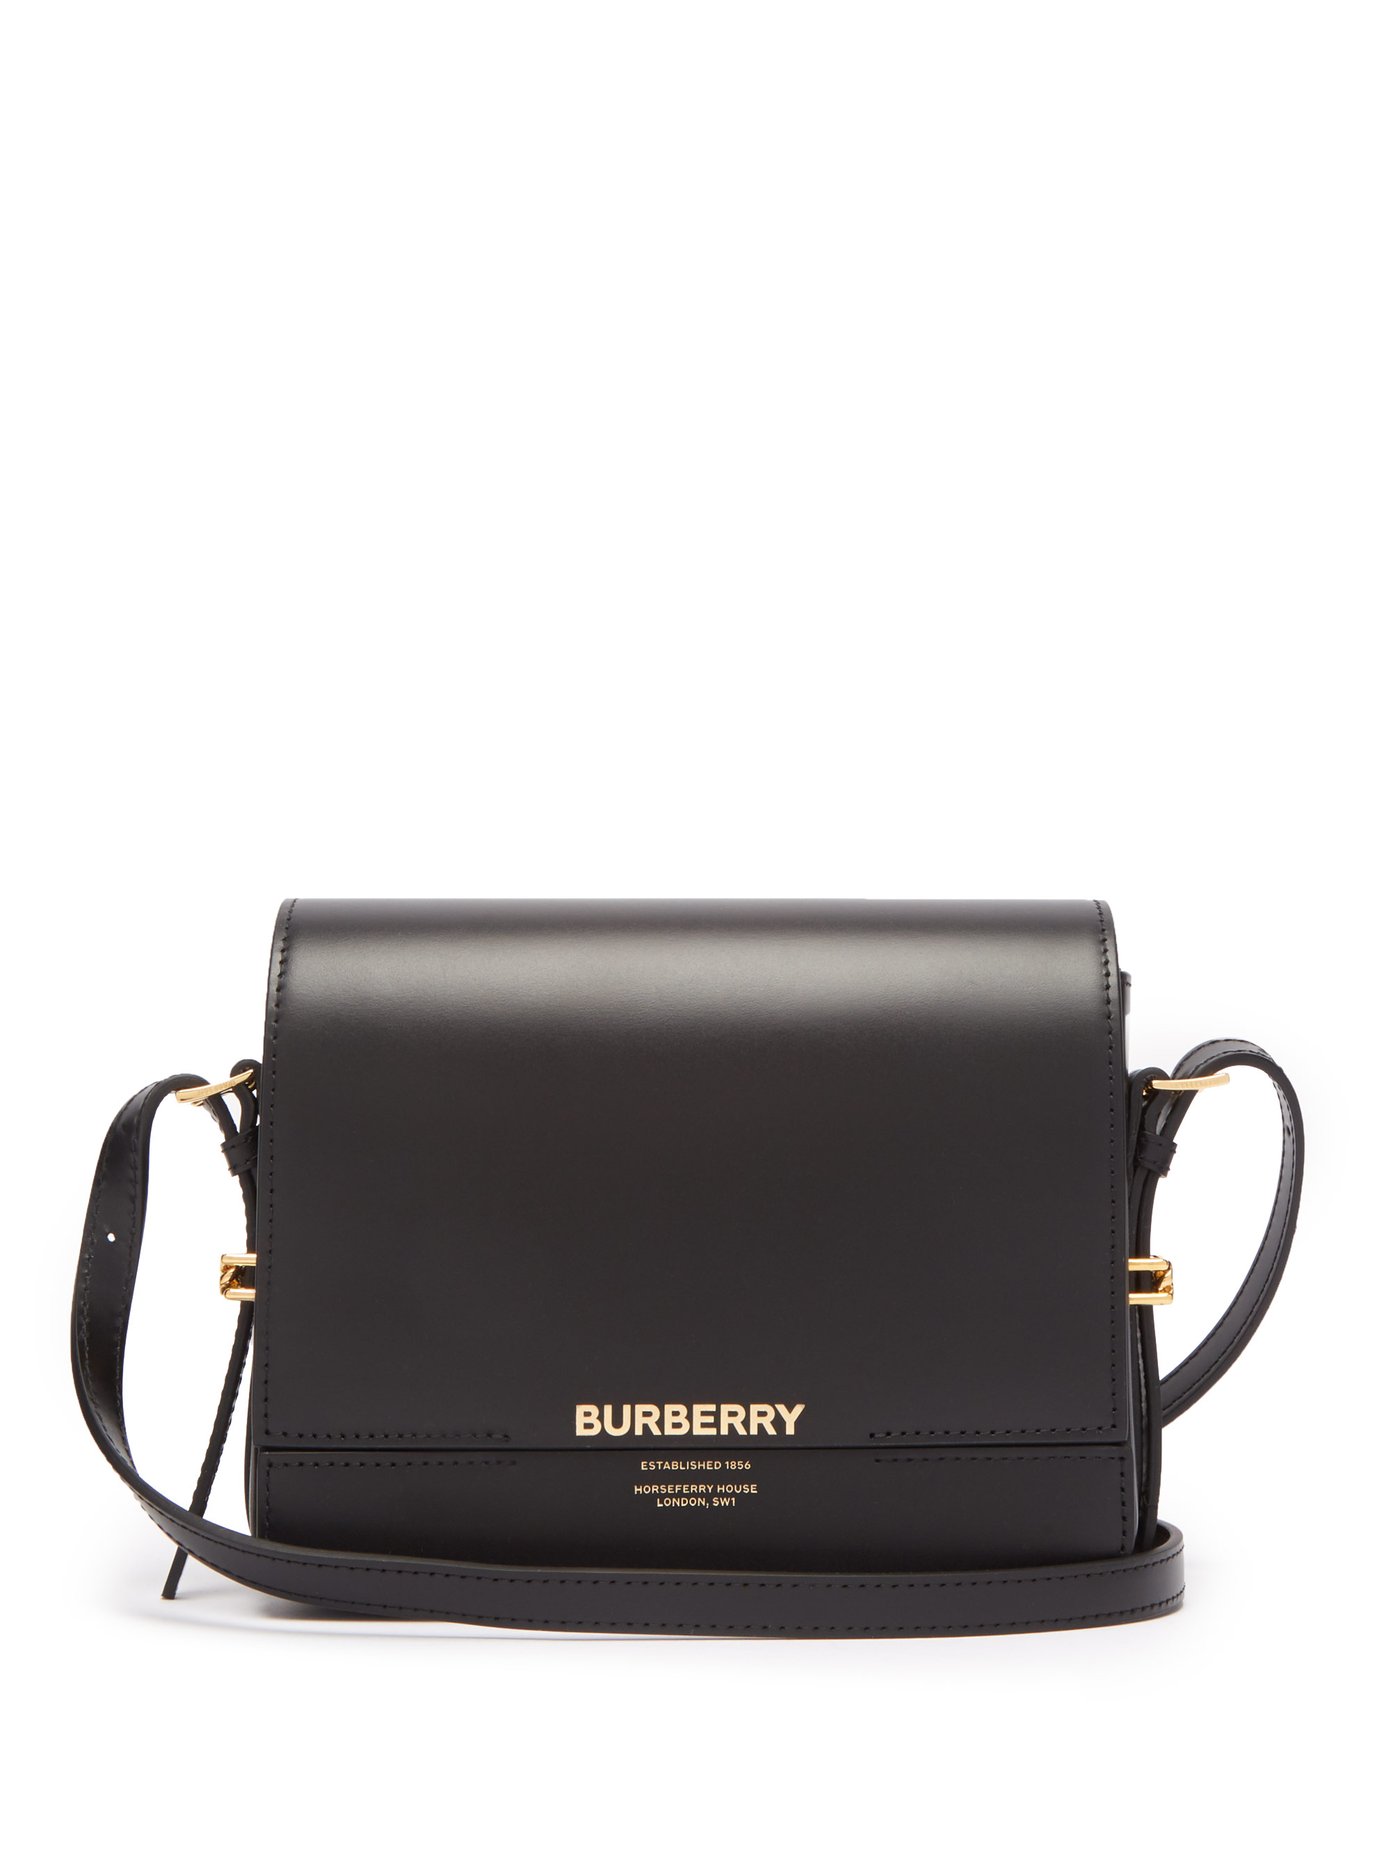 burberry small leather grace bag